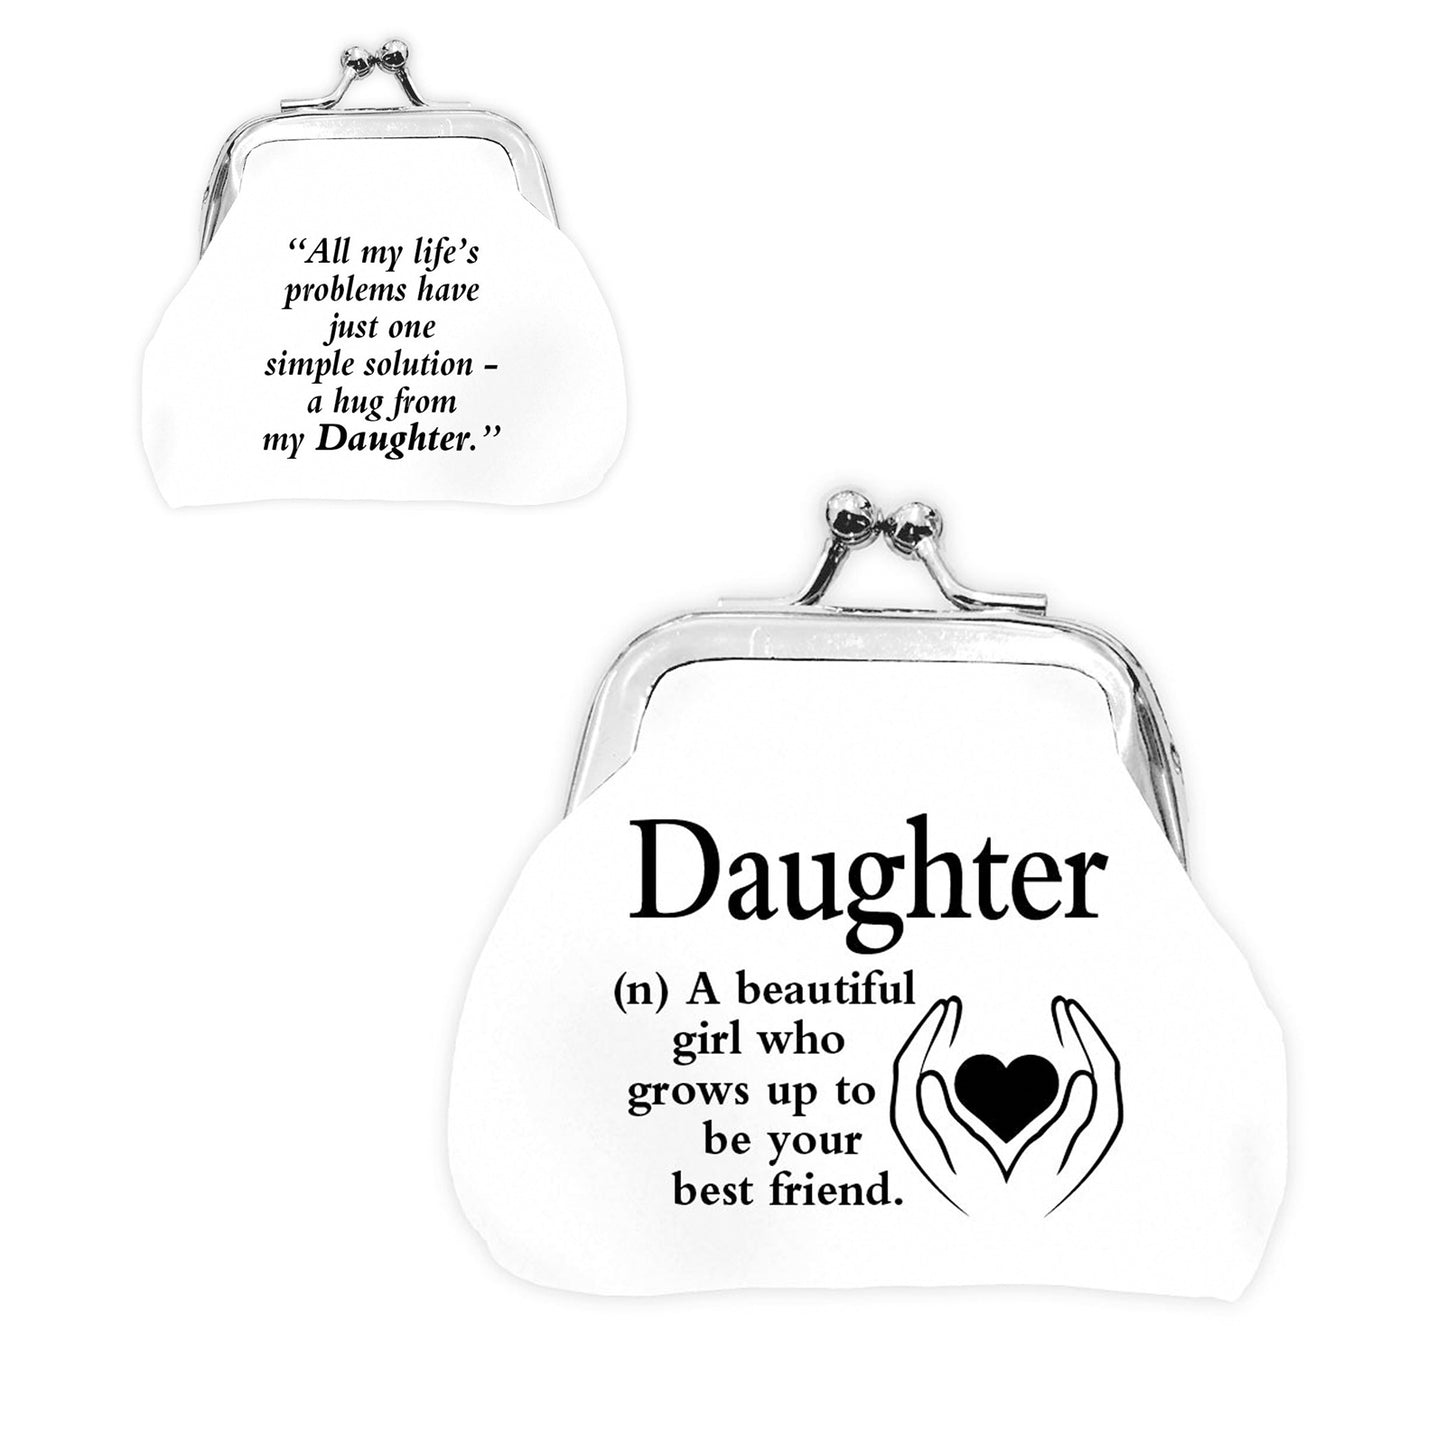 Urban Words Mini Clip Purse "Daughter" with urban Meaning